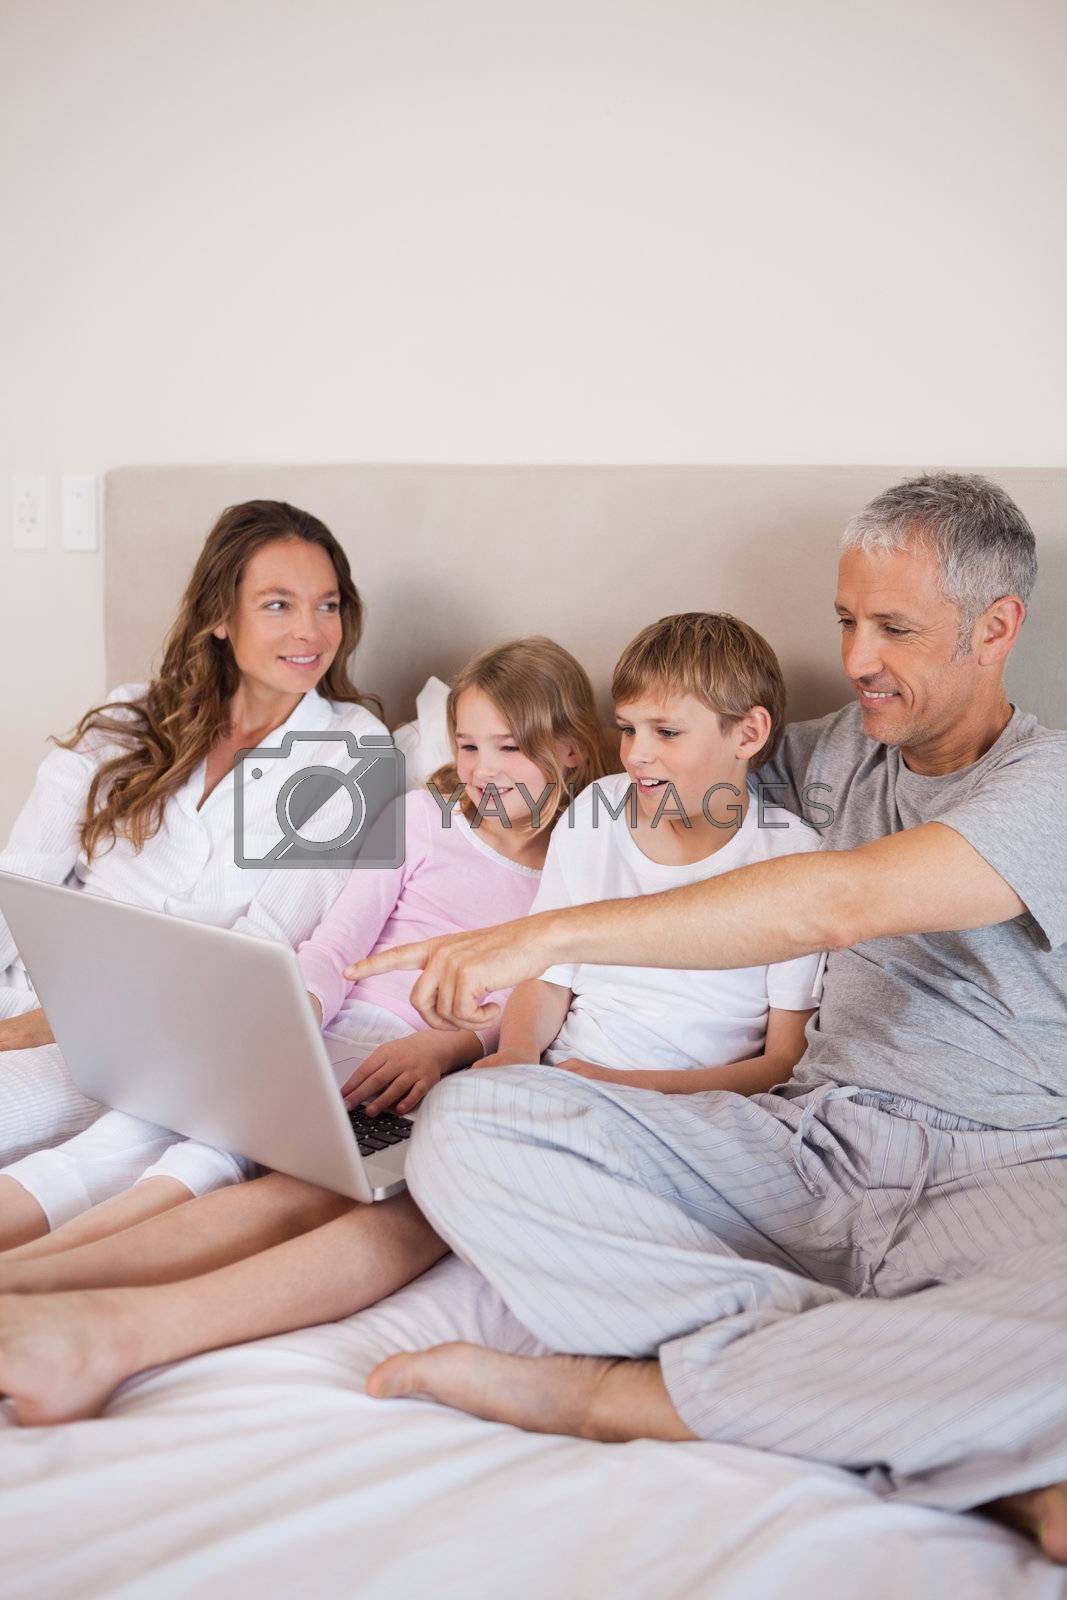 Royalty free image of Portrait of a family using a notebook by Wavebreakmedia